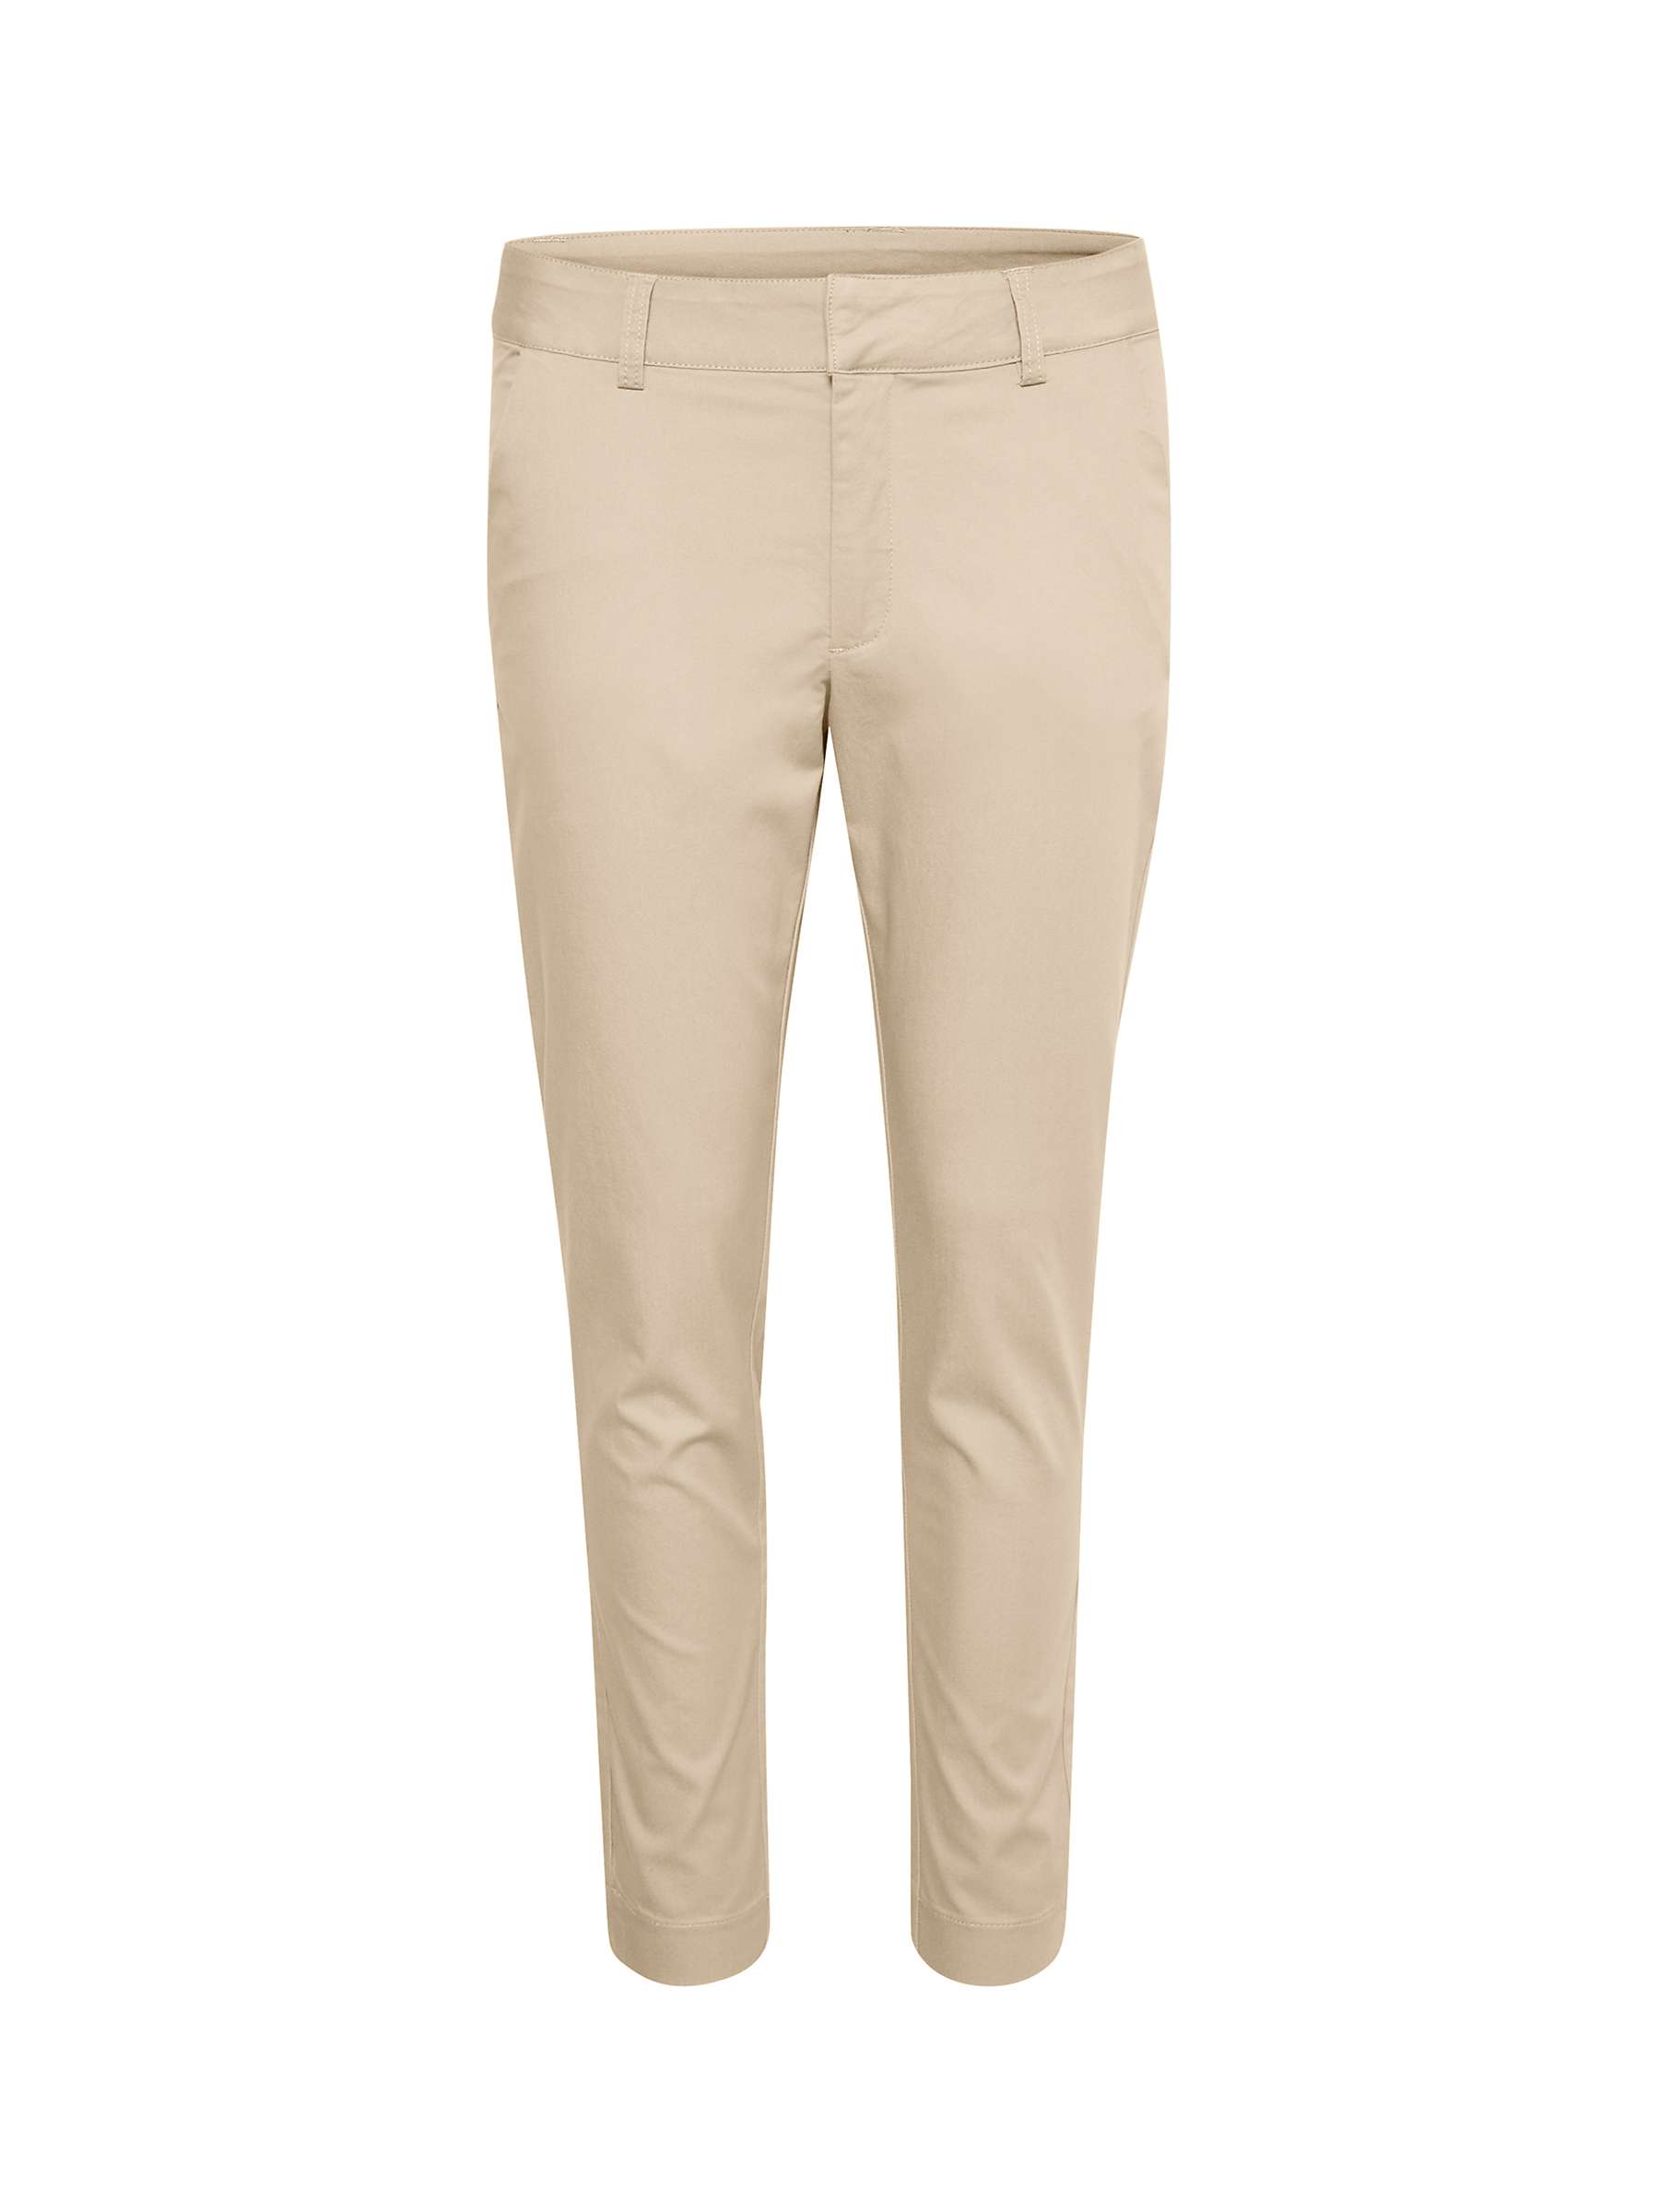 Buy KAFFE Lea 7/8 Chino Trousers, Feather Gray Online at johnlewis.com